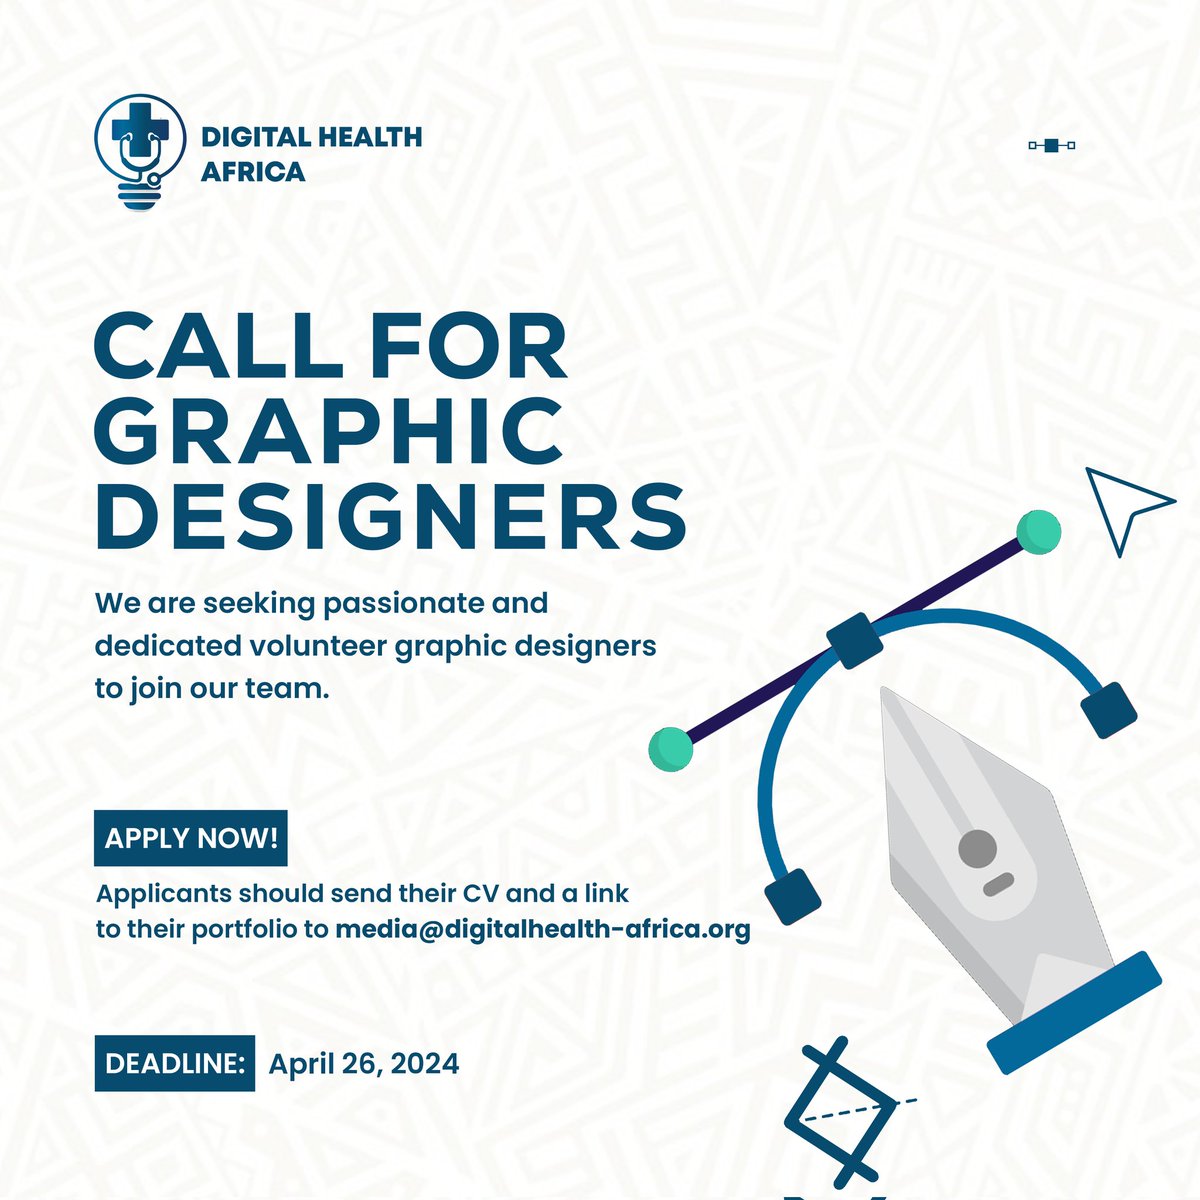 📢Join Our Team: Graphic Designer Wanted! 

Are you passionate about merging creativity with health impact?

Digital Health Africa is seeking talented Graphic Designers to join our dynamic team.

📌How to Apply:
Send your resume and portfolio, to media@digitalhealth-africa.org